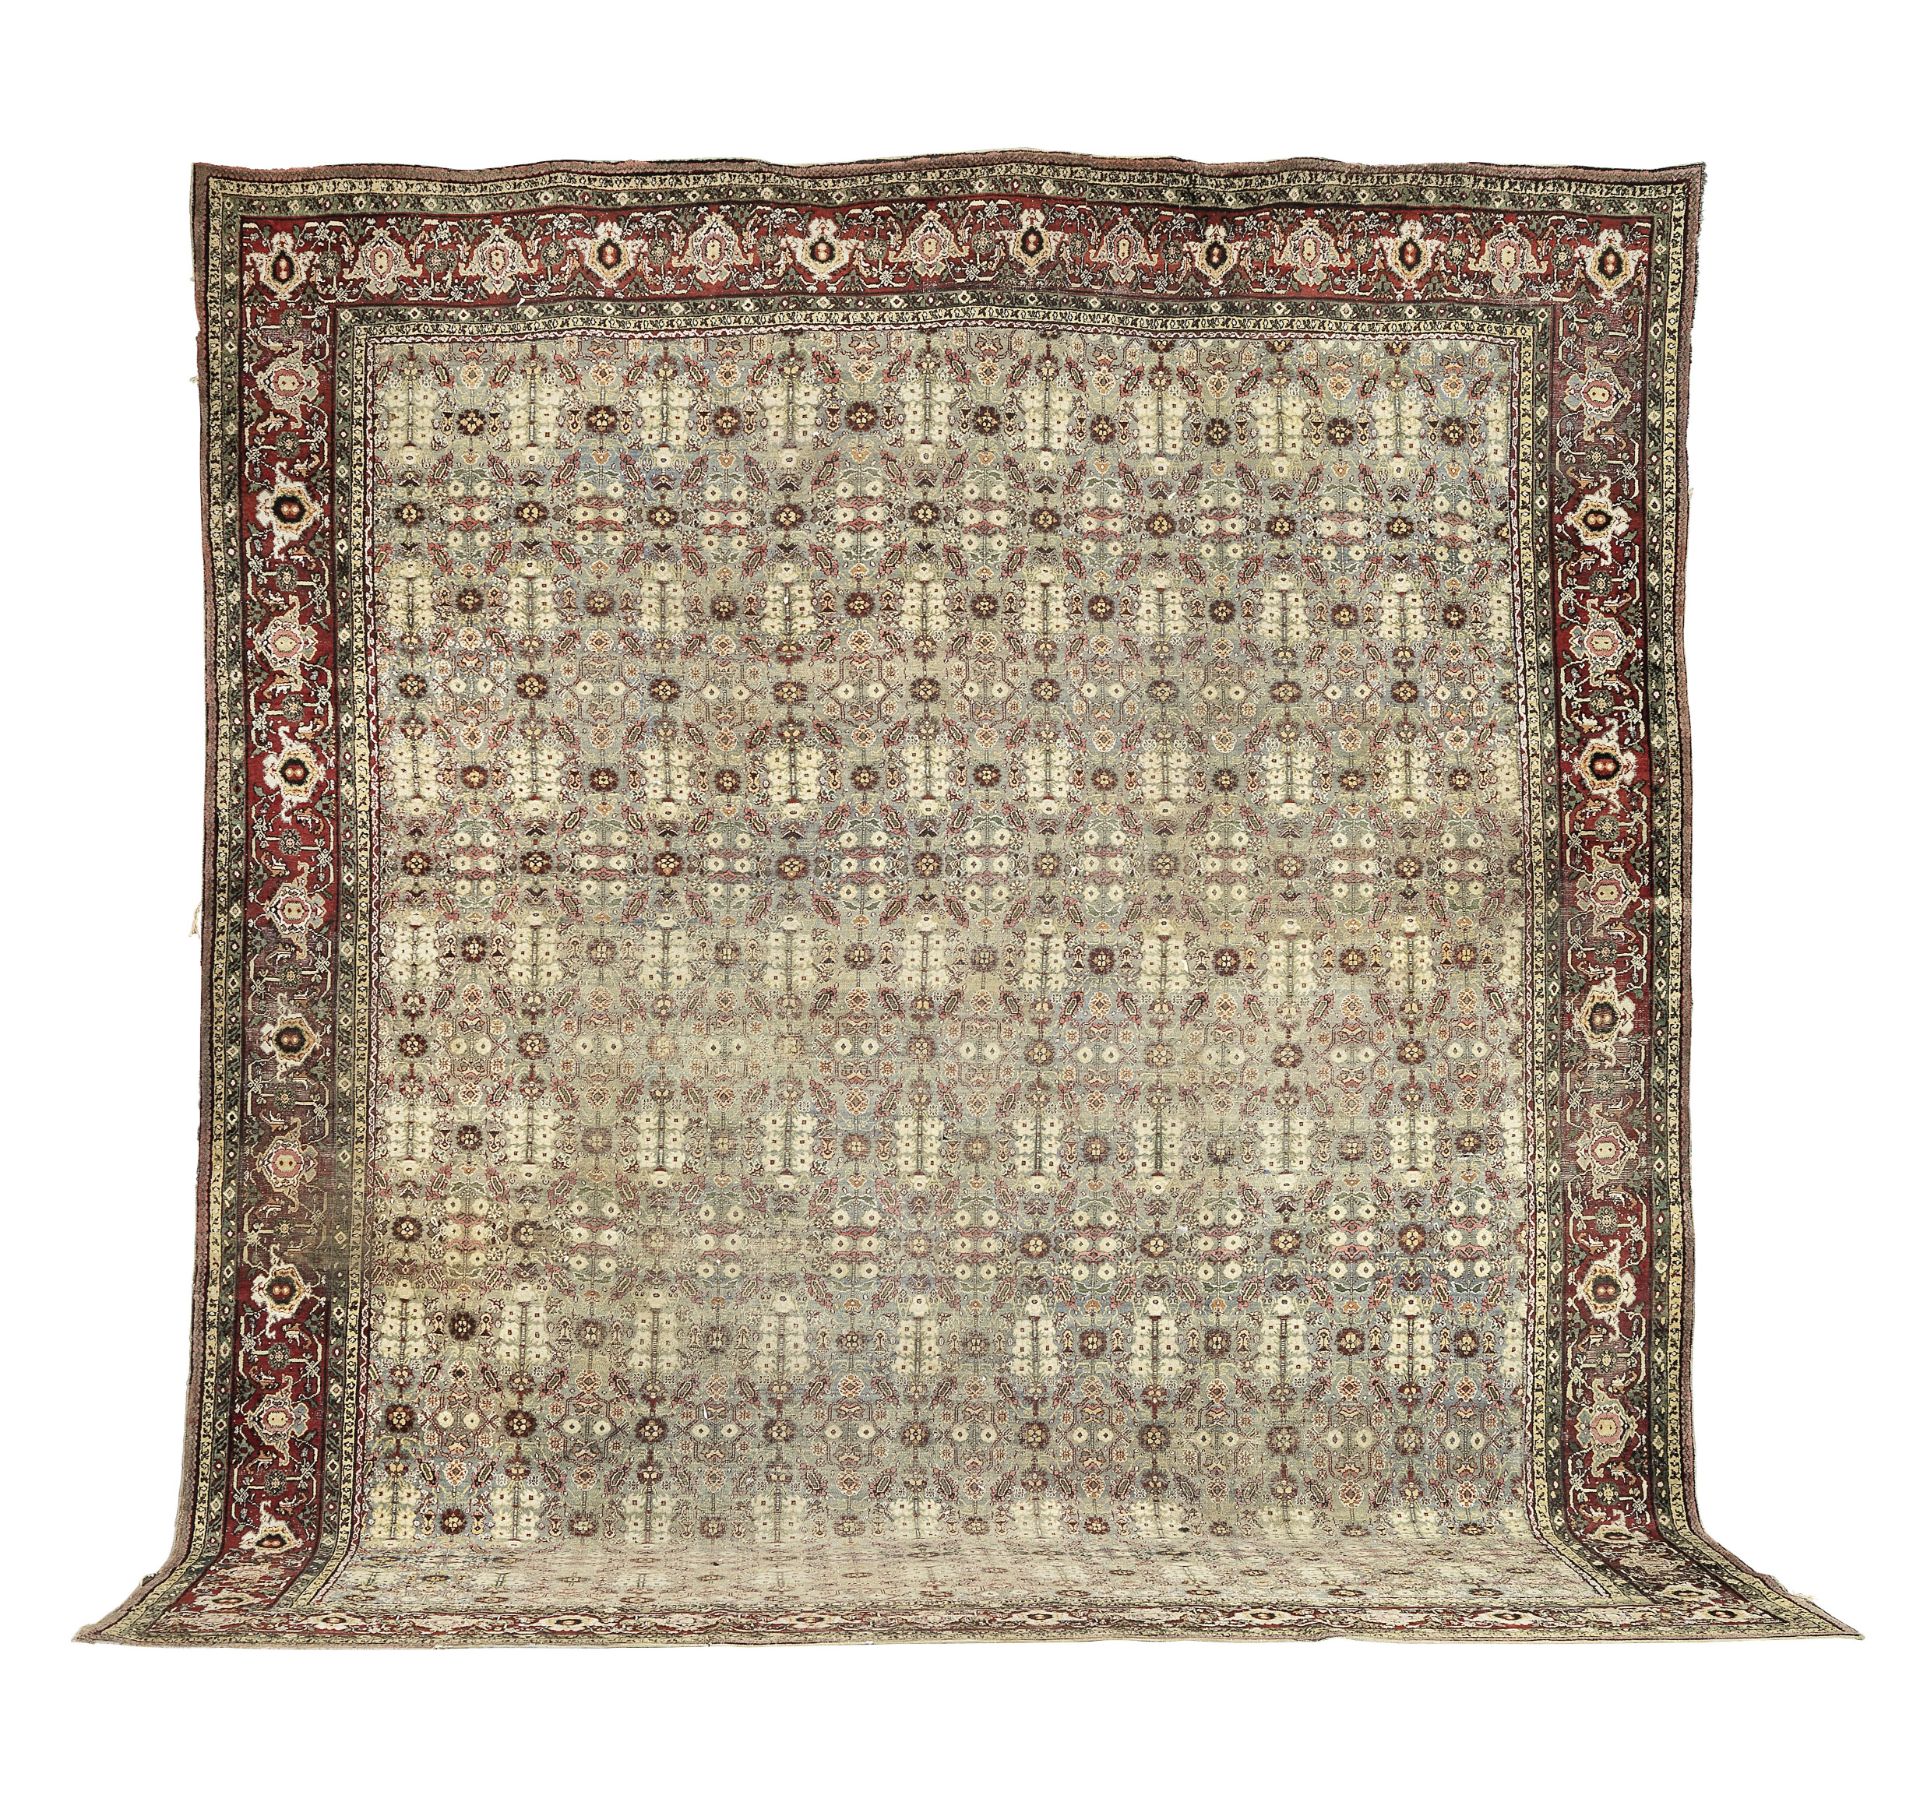 An Indian carpet later reduced 520cm x 421cm